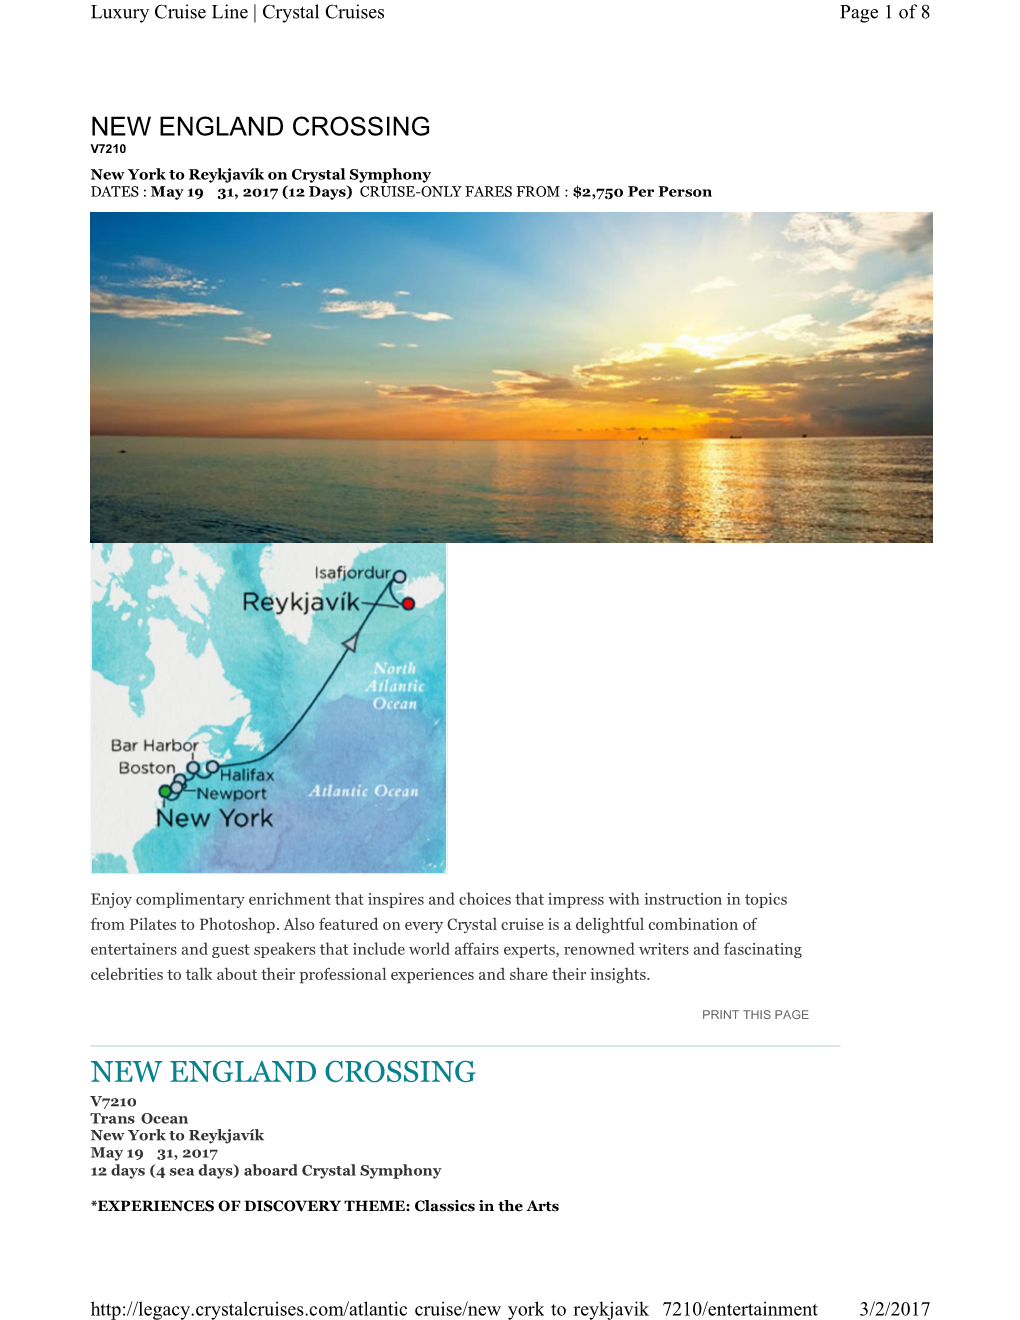 NEW ENGLAND CROSSING V7210 New York to Reykjavík on Crystal Symphony DATES : May 19 • 31, 2017 (12 Days) CRUISE-ONLY FARES from : $2,750 Per Person